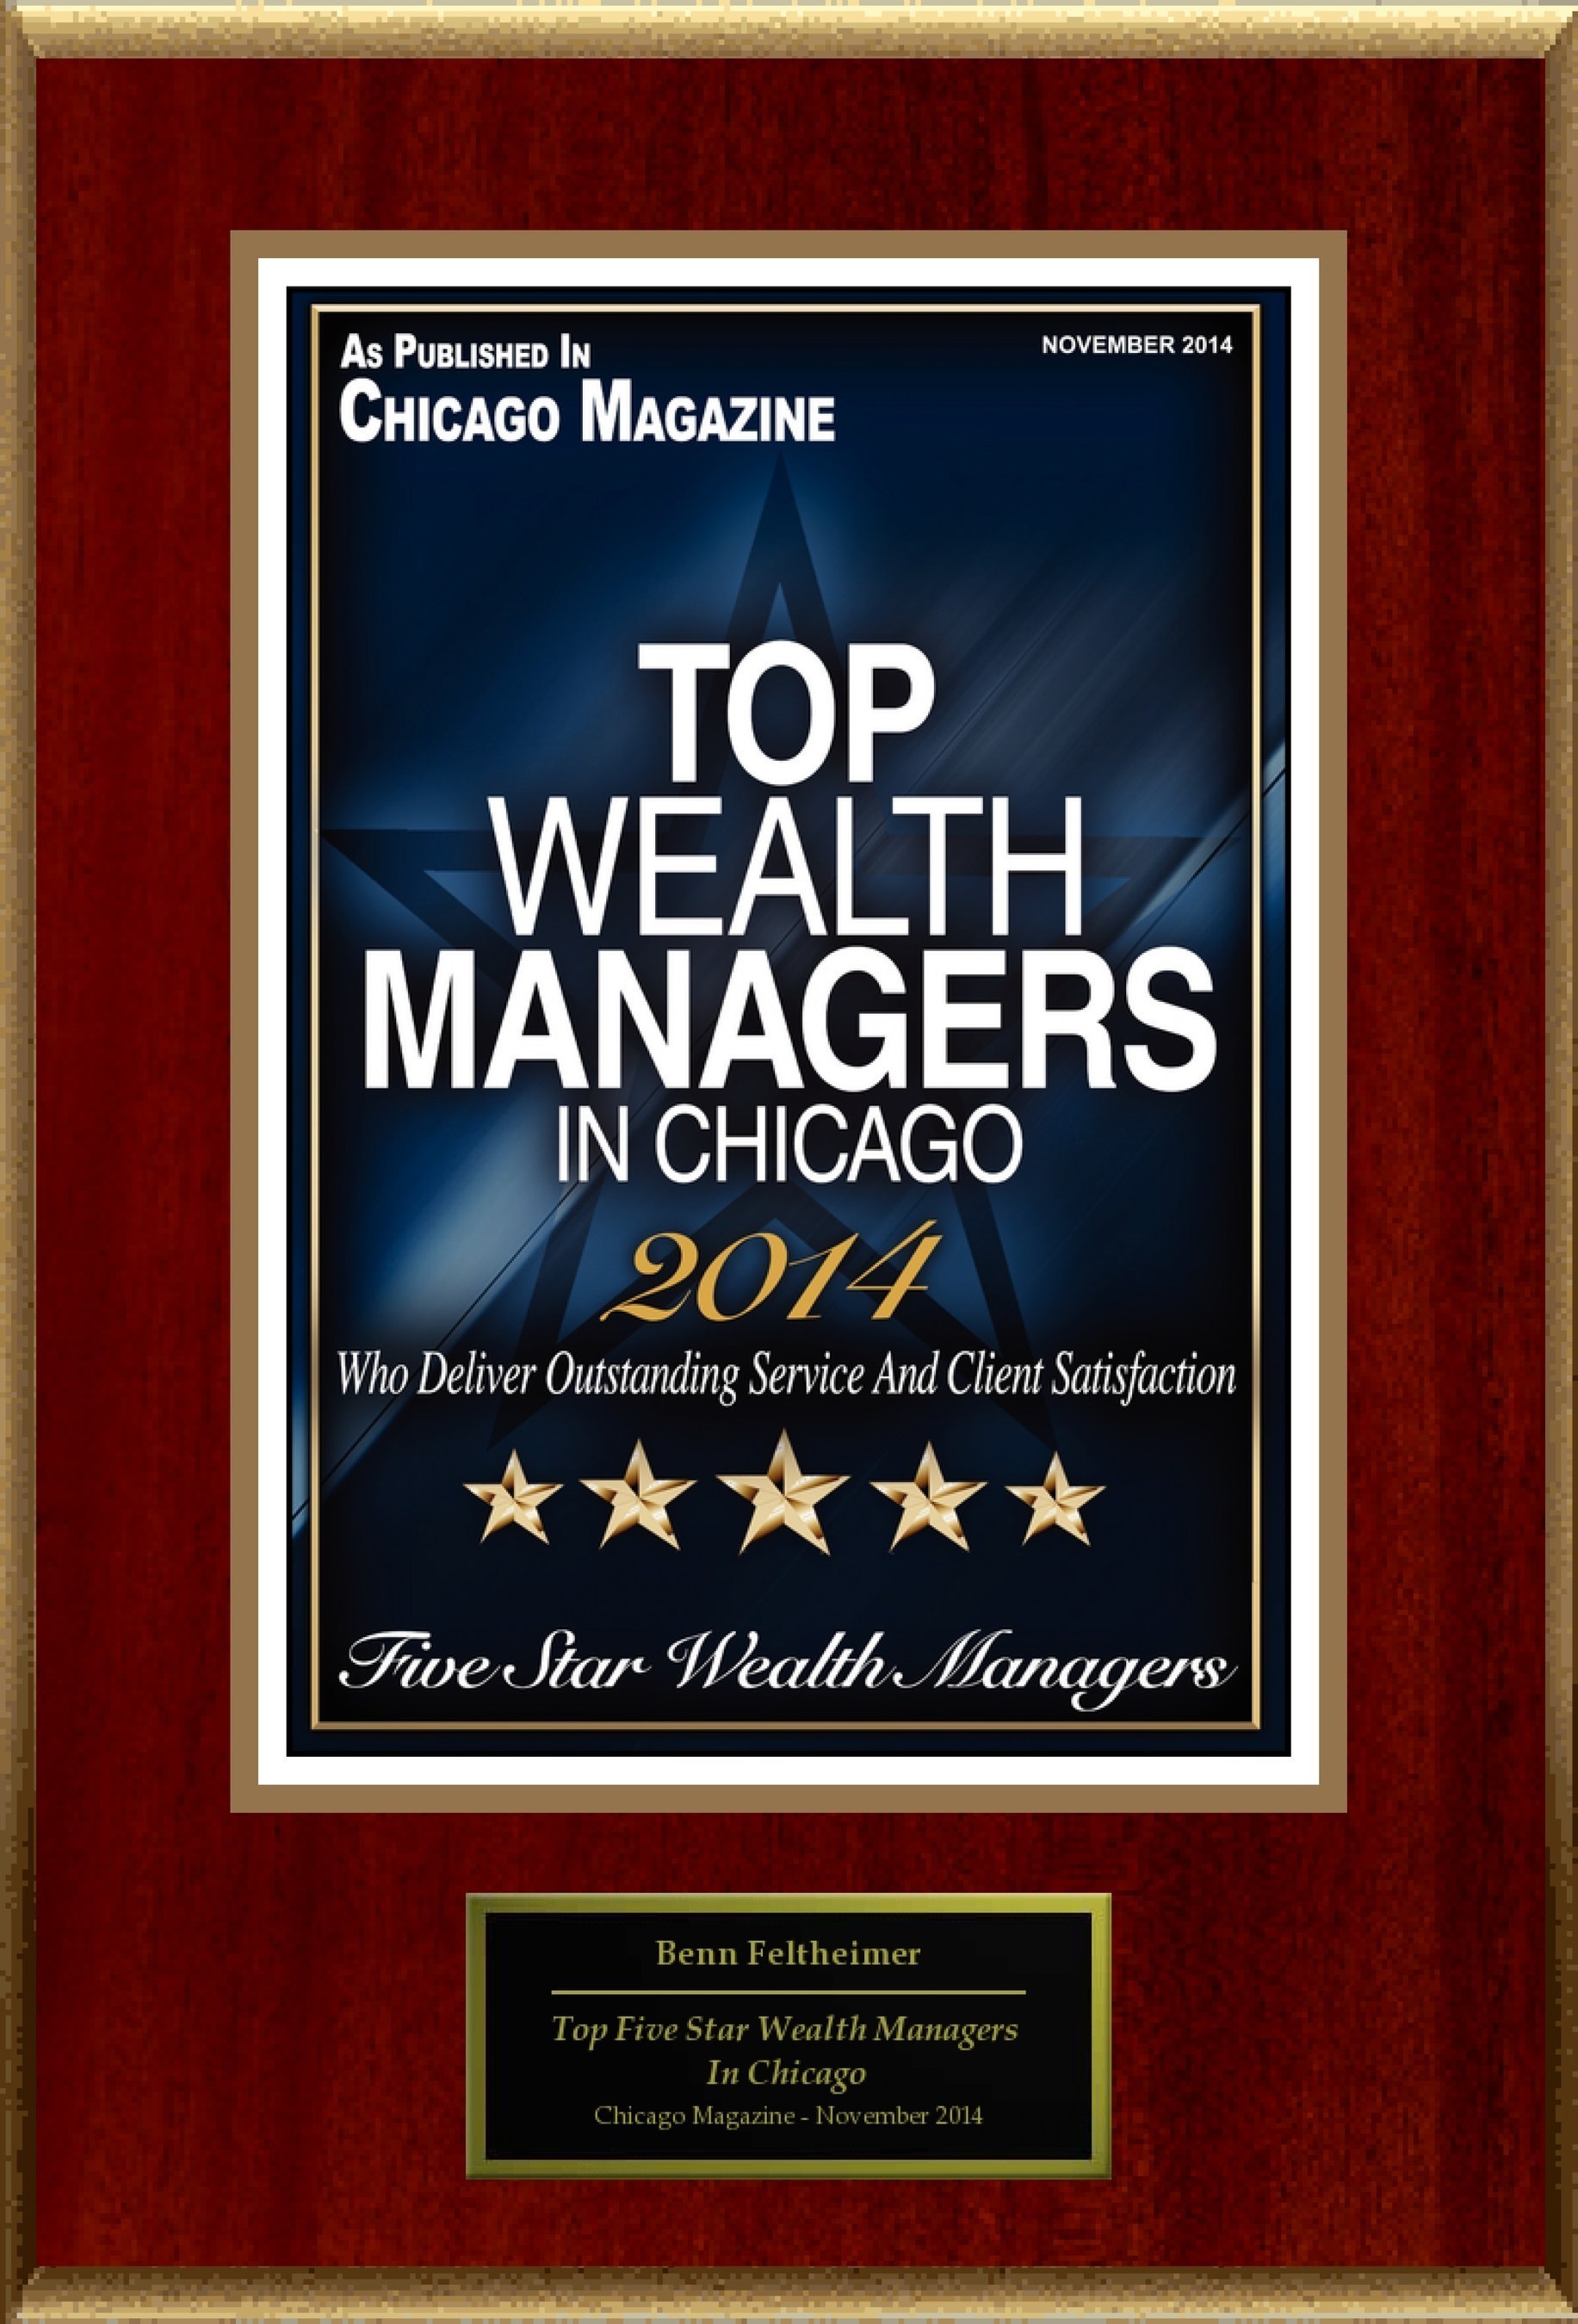 Benn Feltheimer of Feltheimer Cohen & Associates Selected For "Top Five Star Wealth Managers In Chicago"